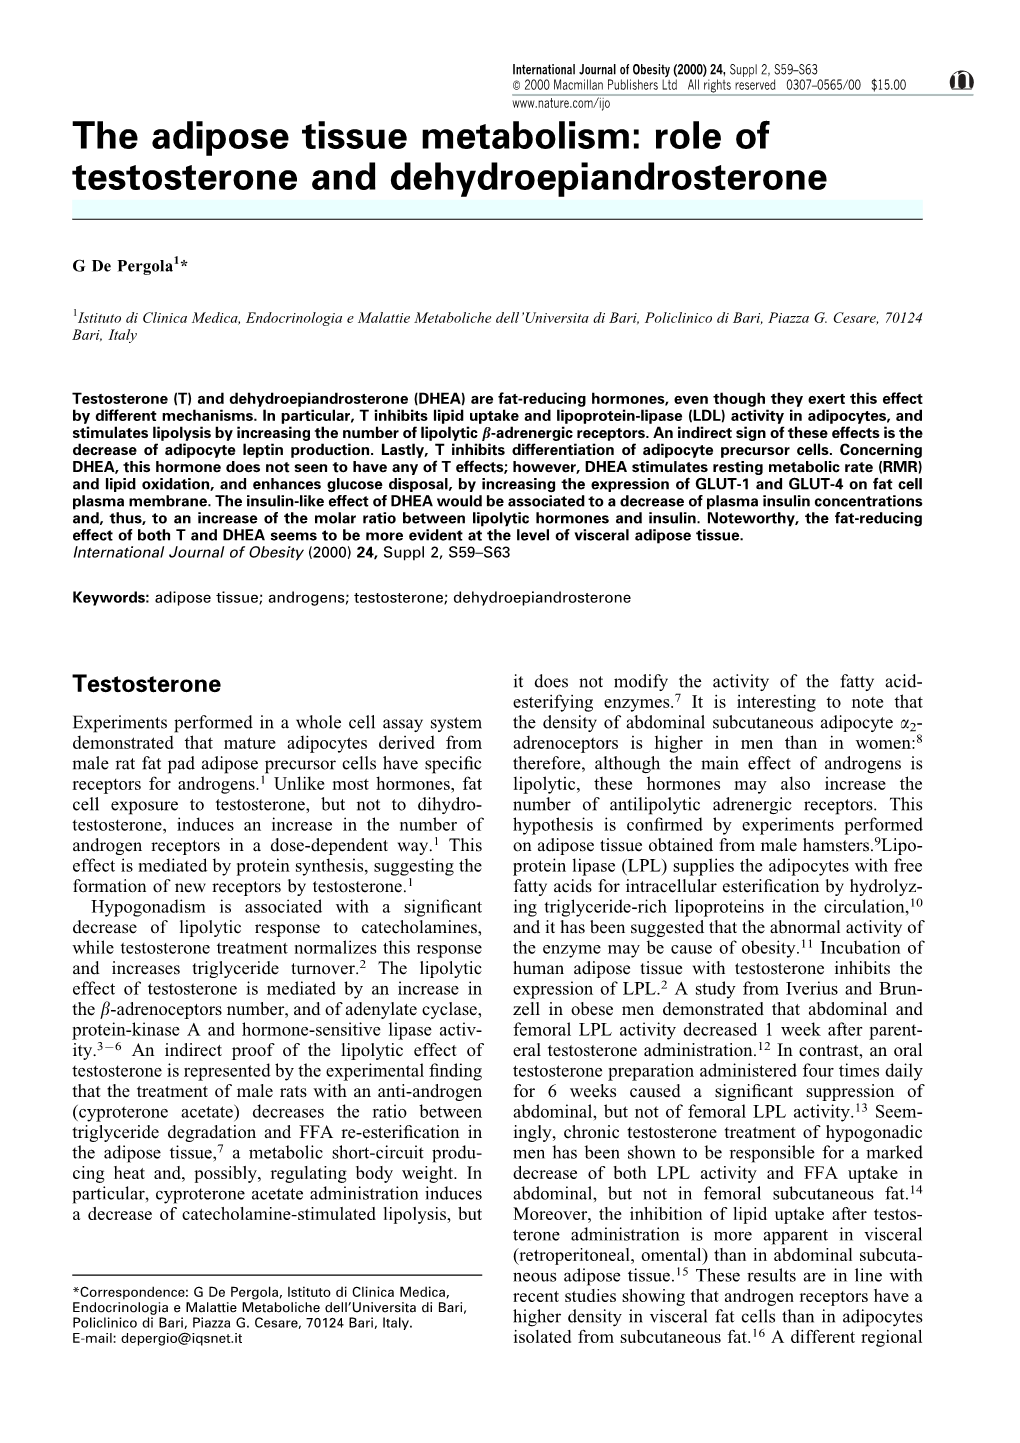 The Adipose Tissue Metabolism: Role of Testosterone and Dehydroepiandrosterone